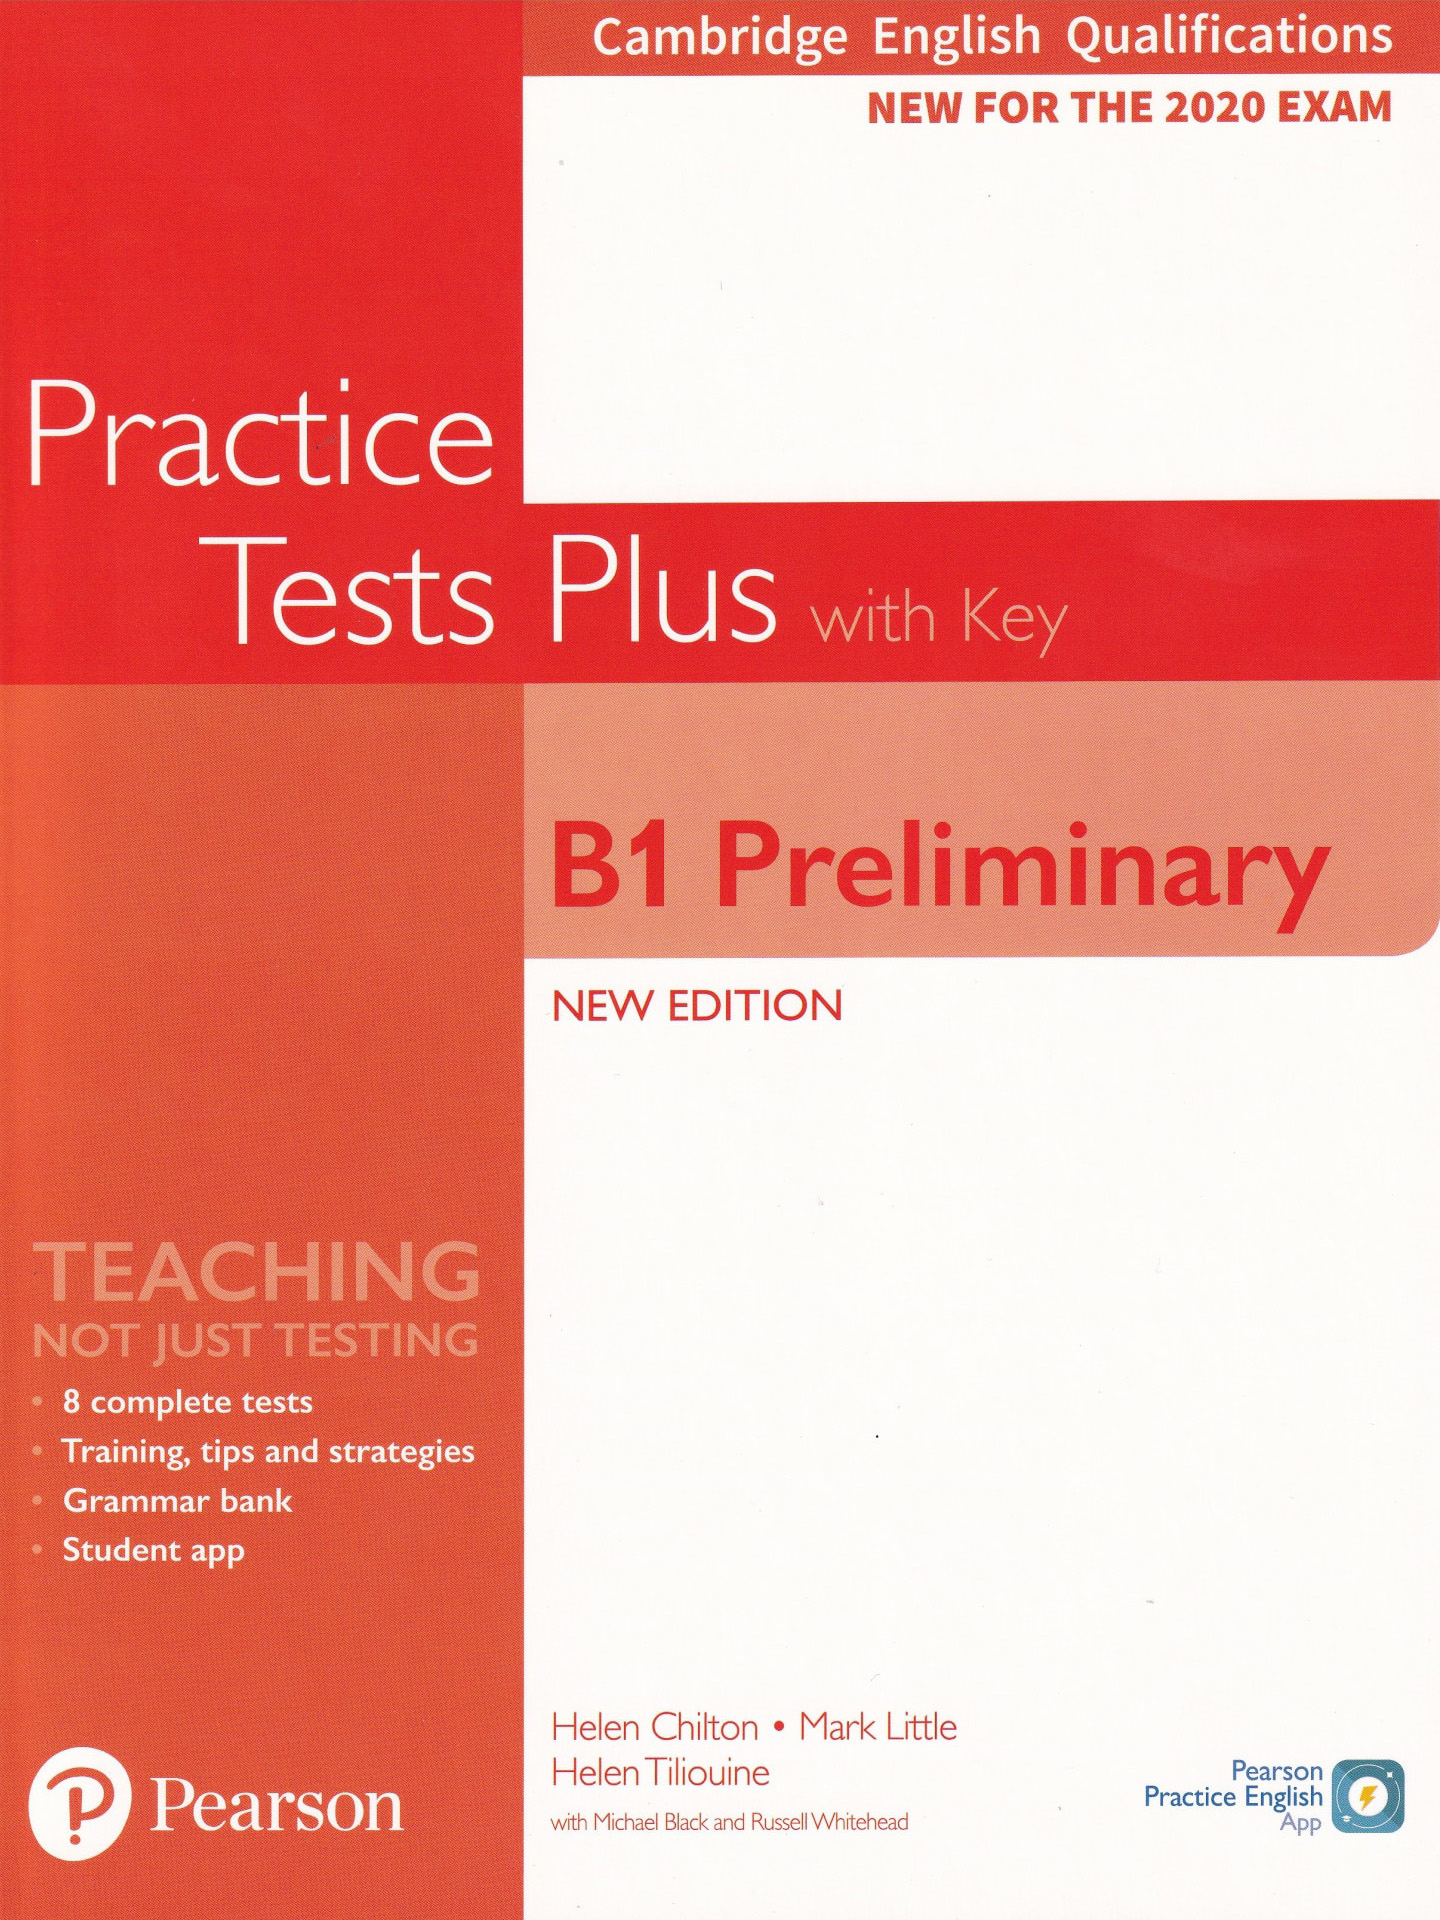 Cambridge English Qualifications: B1 Preliminary New Edition - Practice Tests Plus Student's Book with key | Helen Chilton, Mark Little, Helen Tiliouine, Michael Black, Russell Whitehead